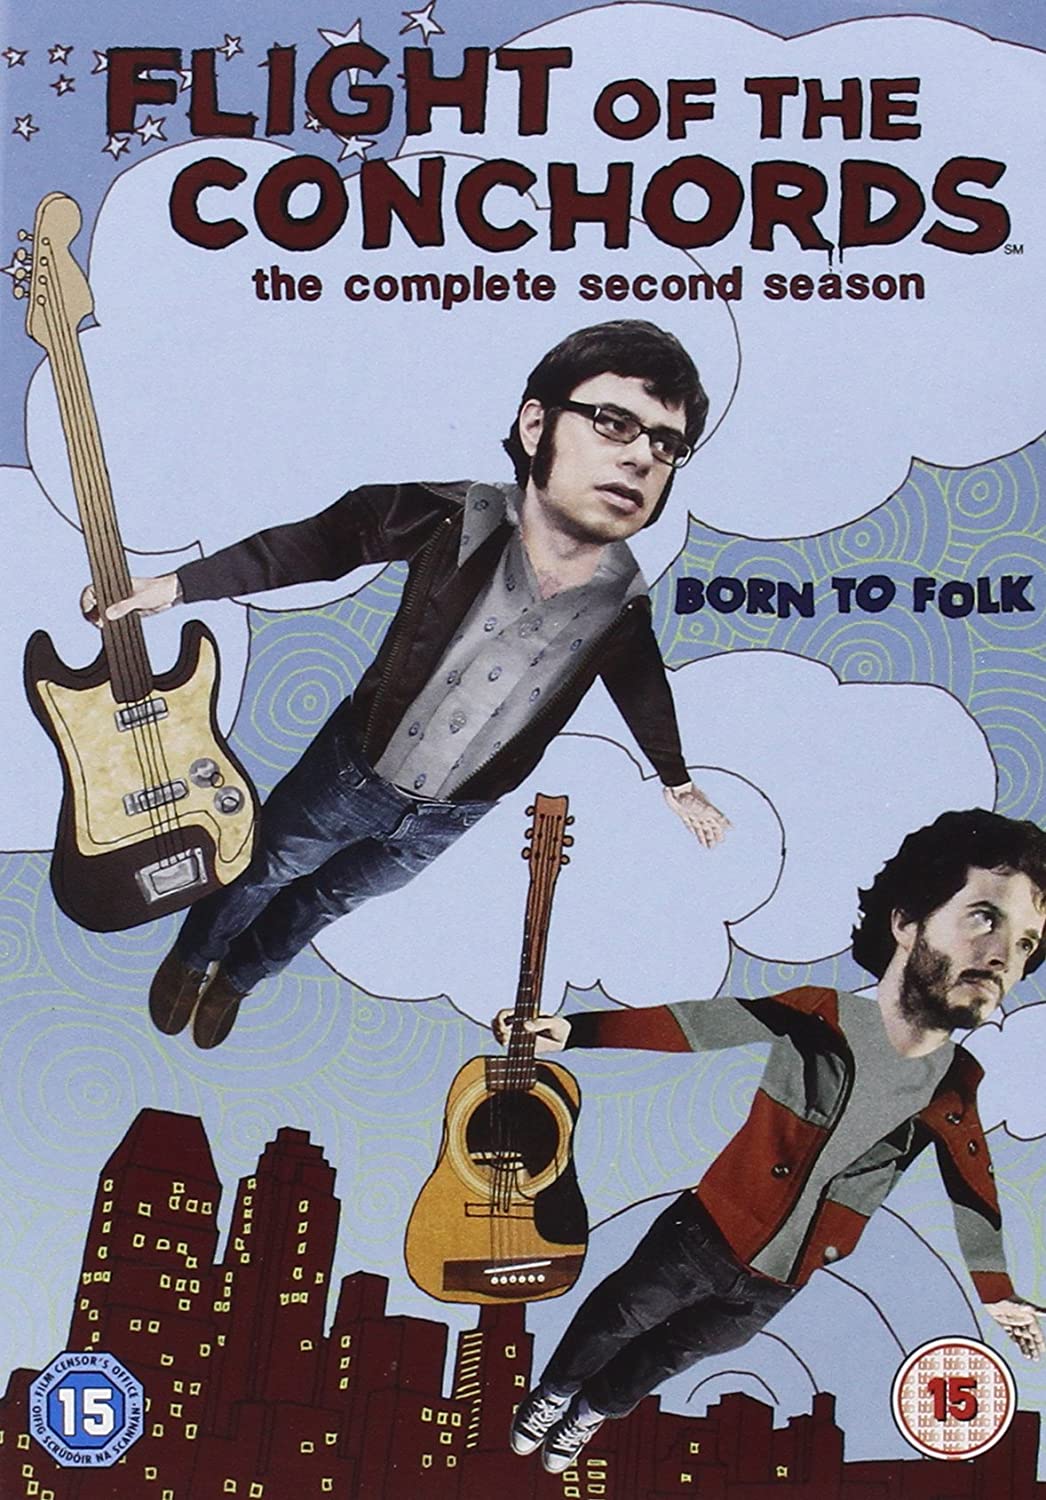 Flight Of The Conchords - Complete HBO First and Second Season [DVD]